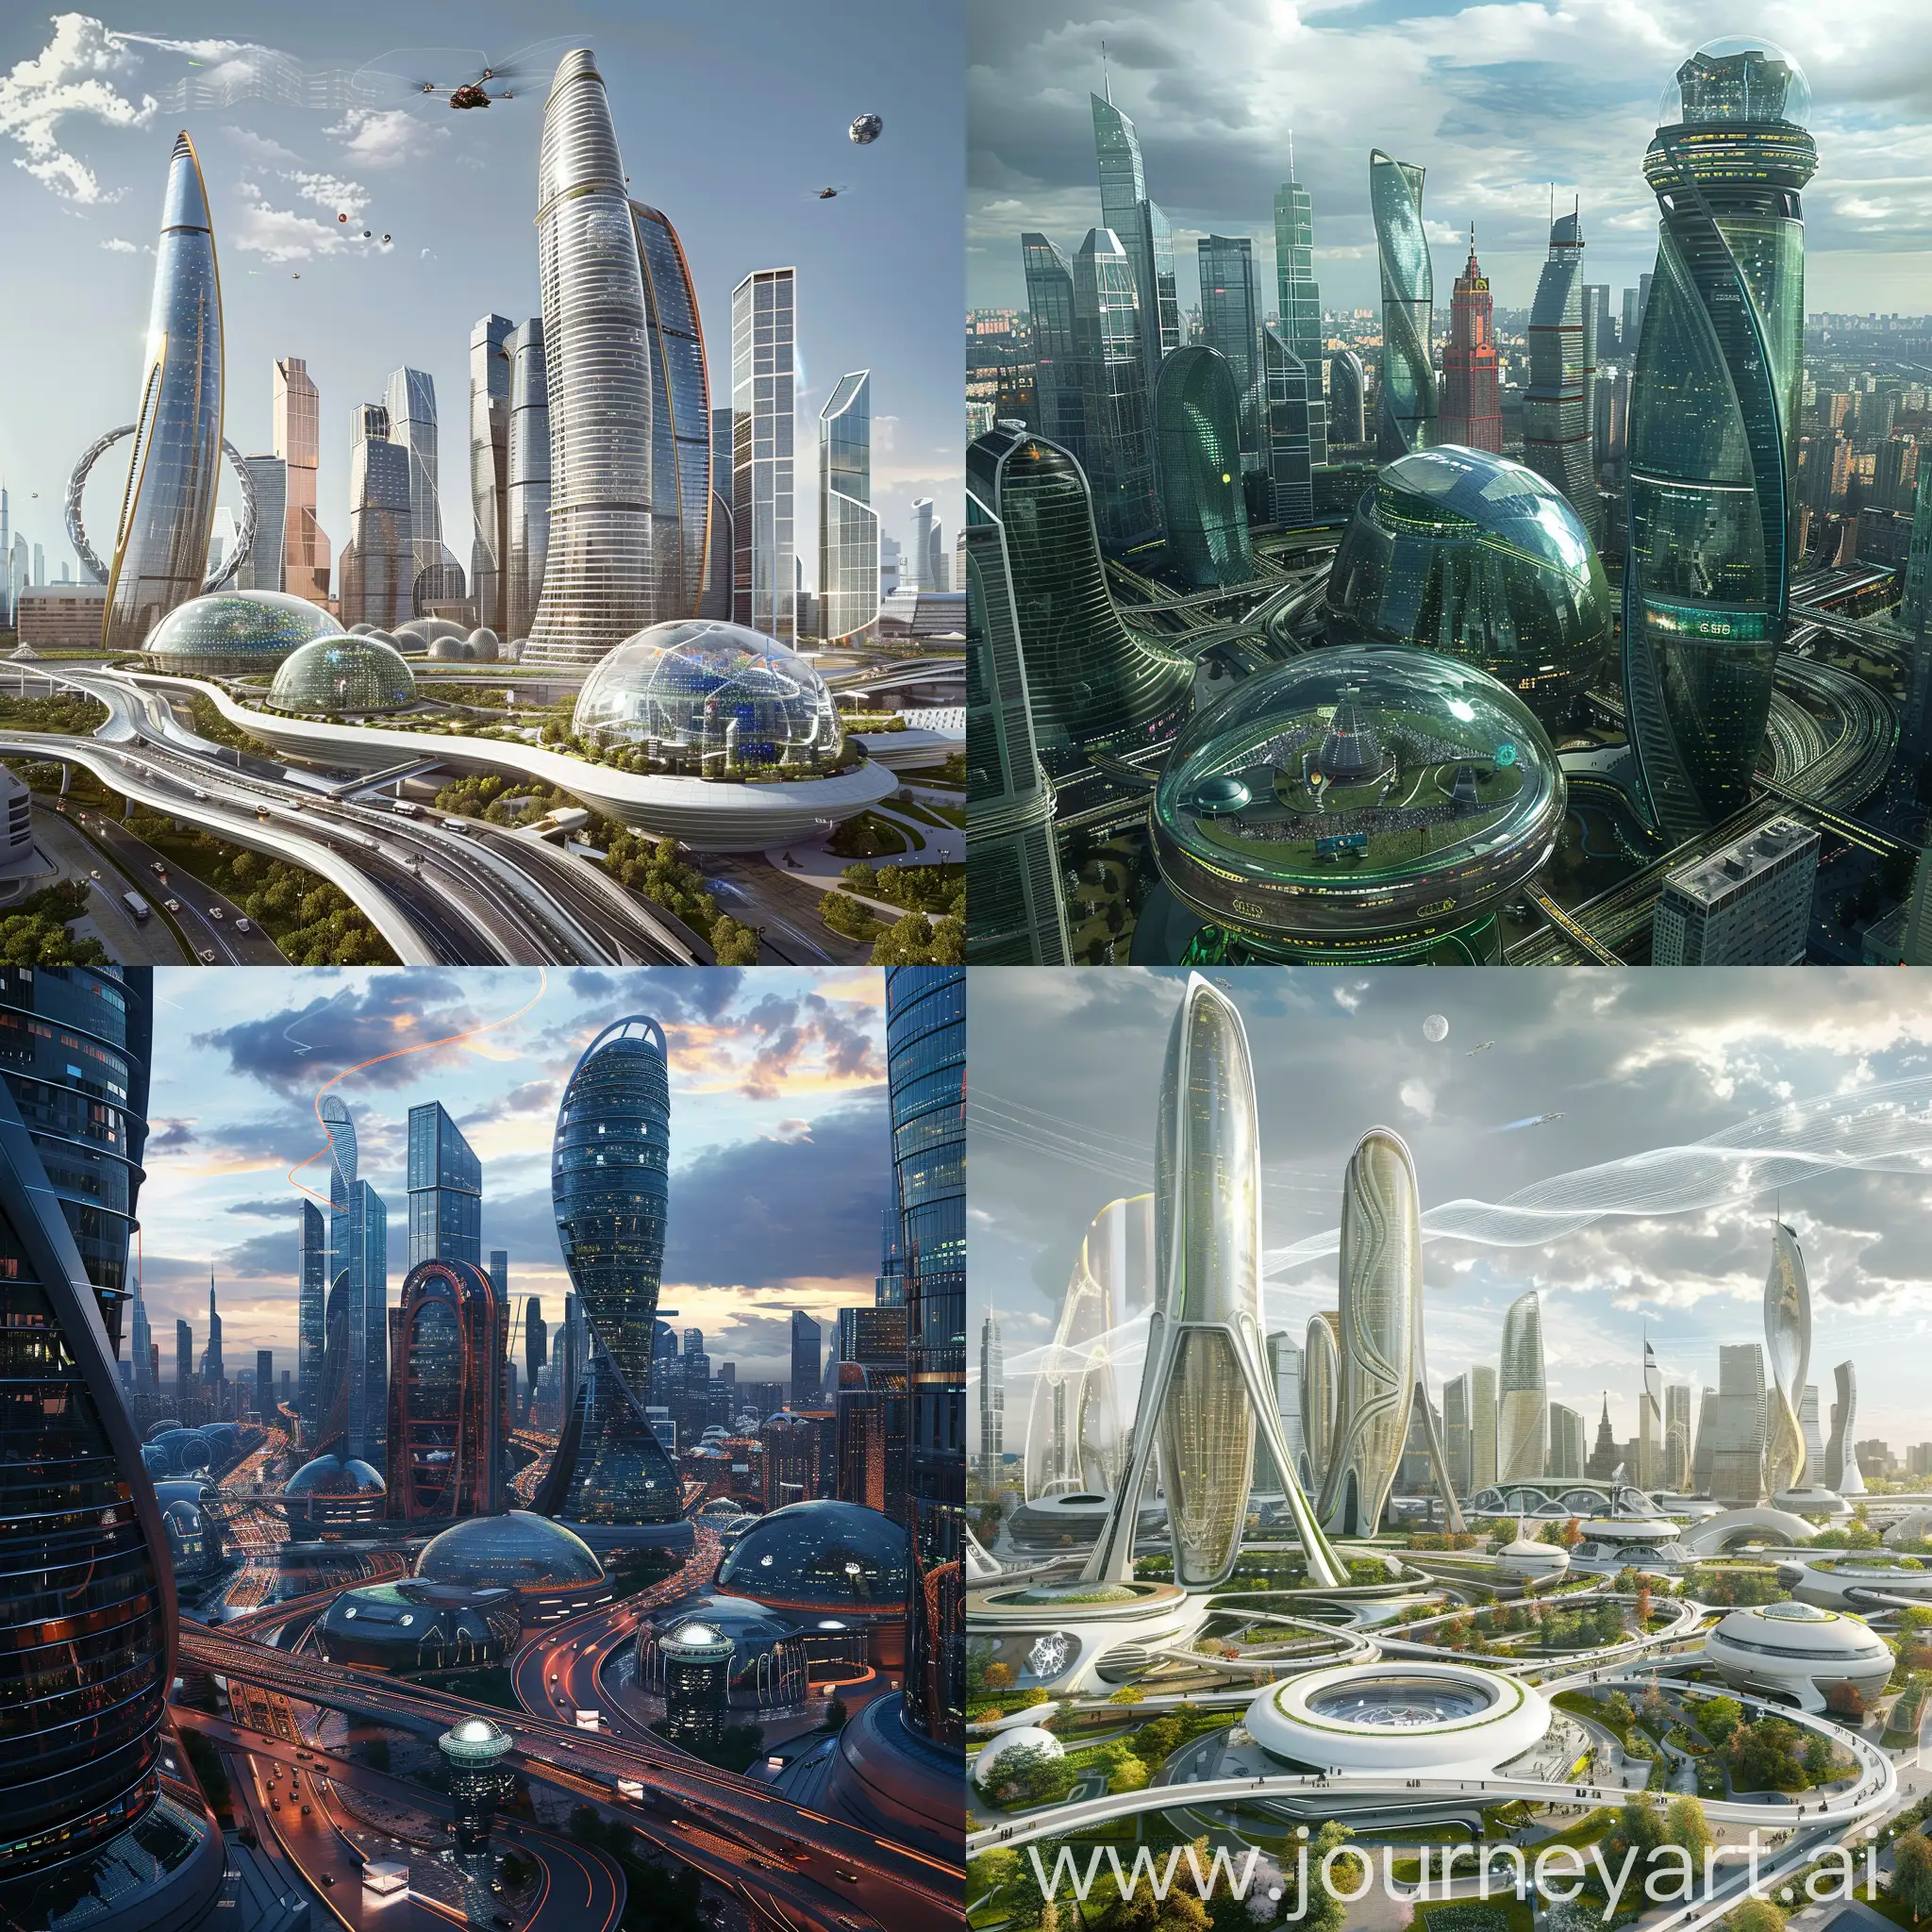 Futuristic-Moscow-Skyline-with-EcoSkyscrapers-and-AIGuided-Public-Transport